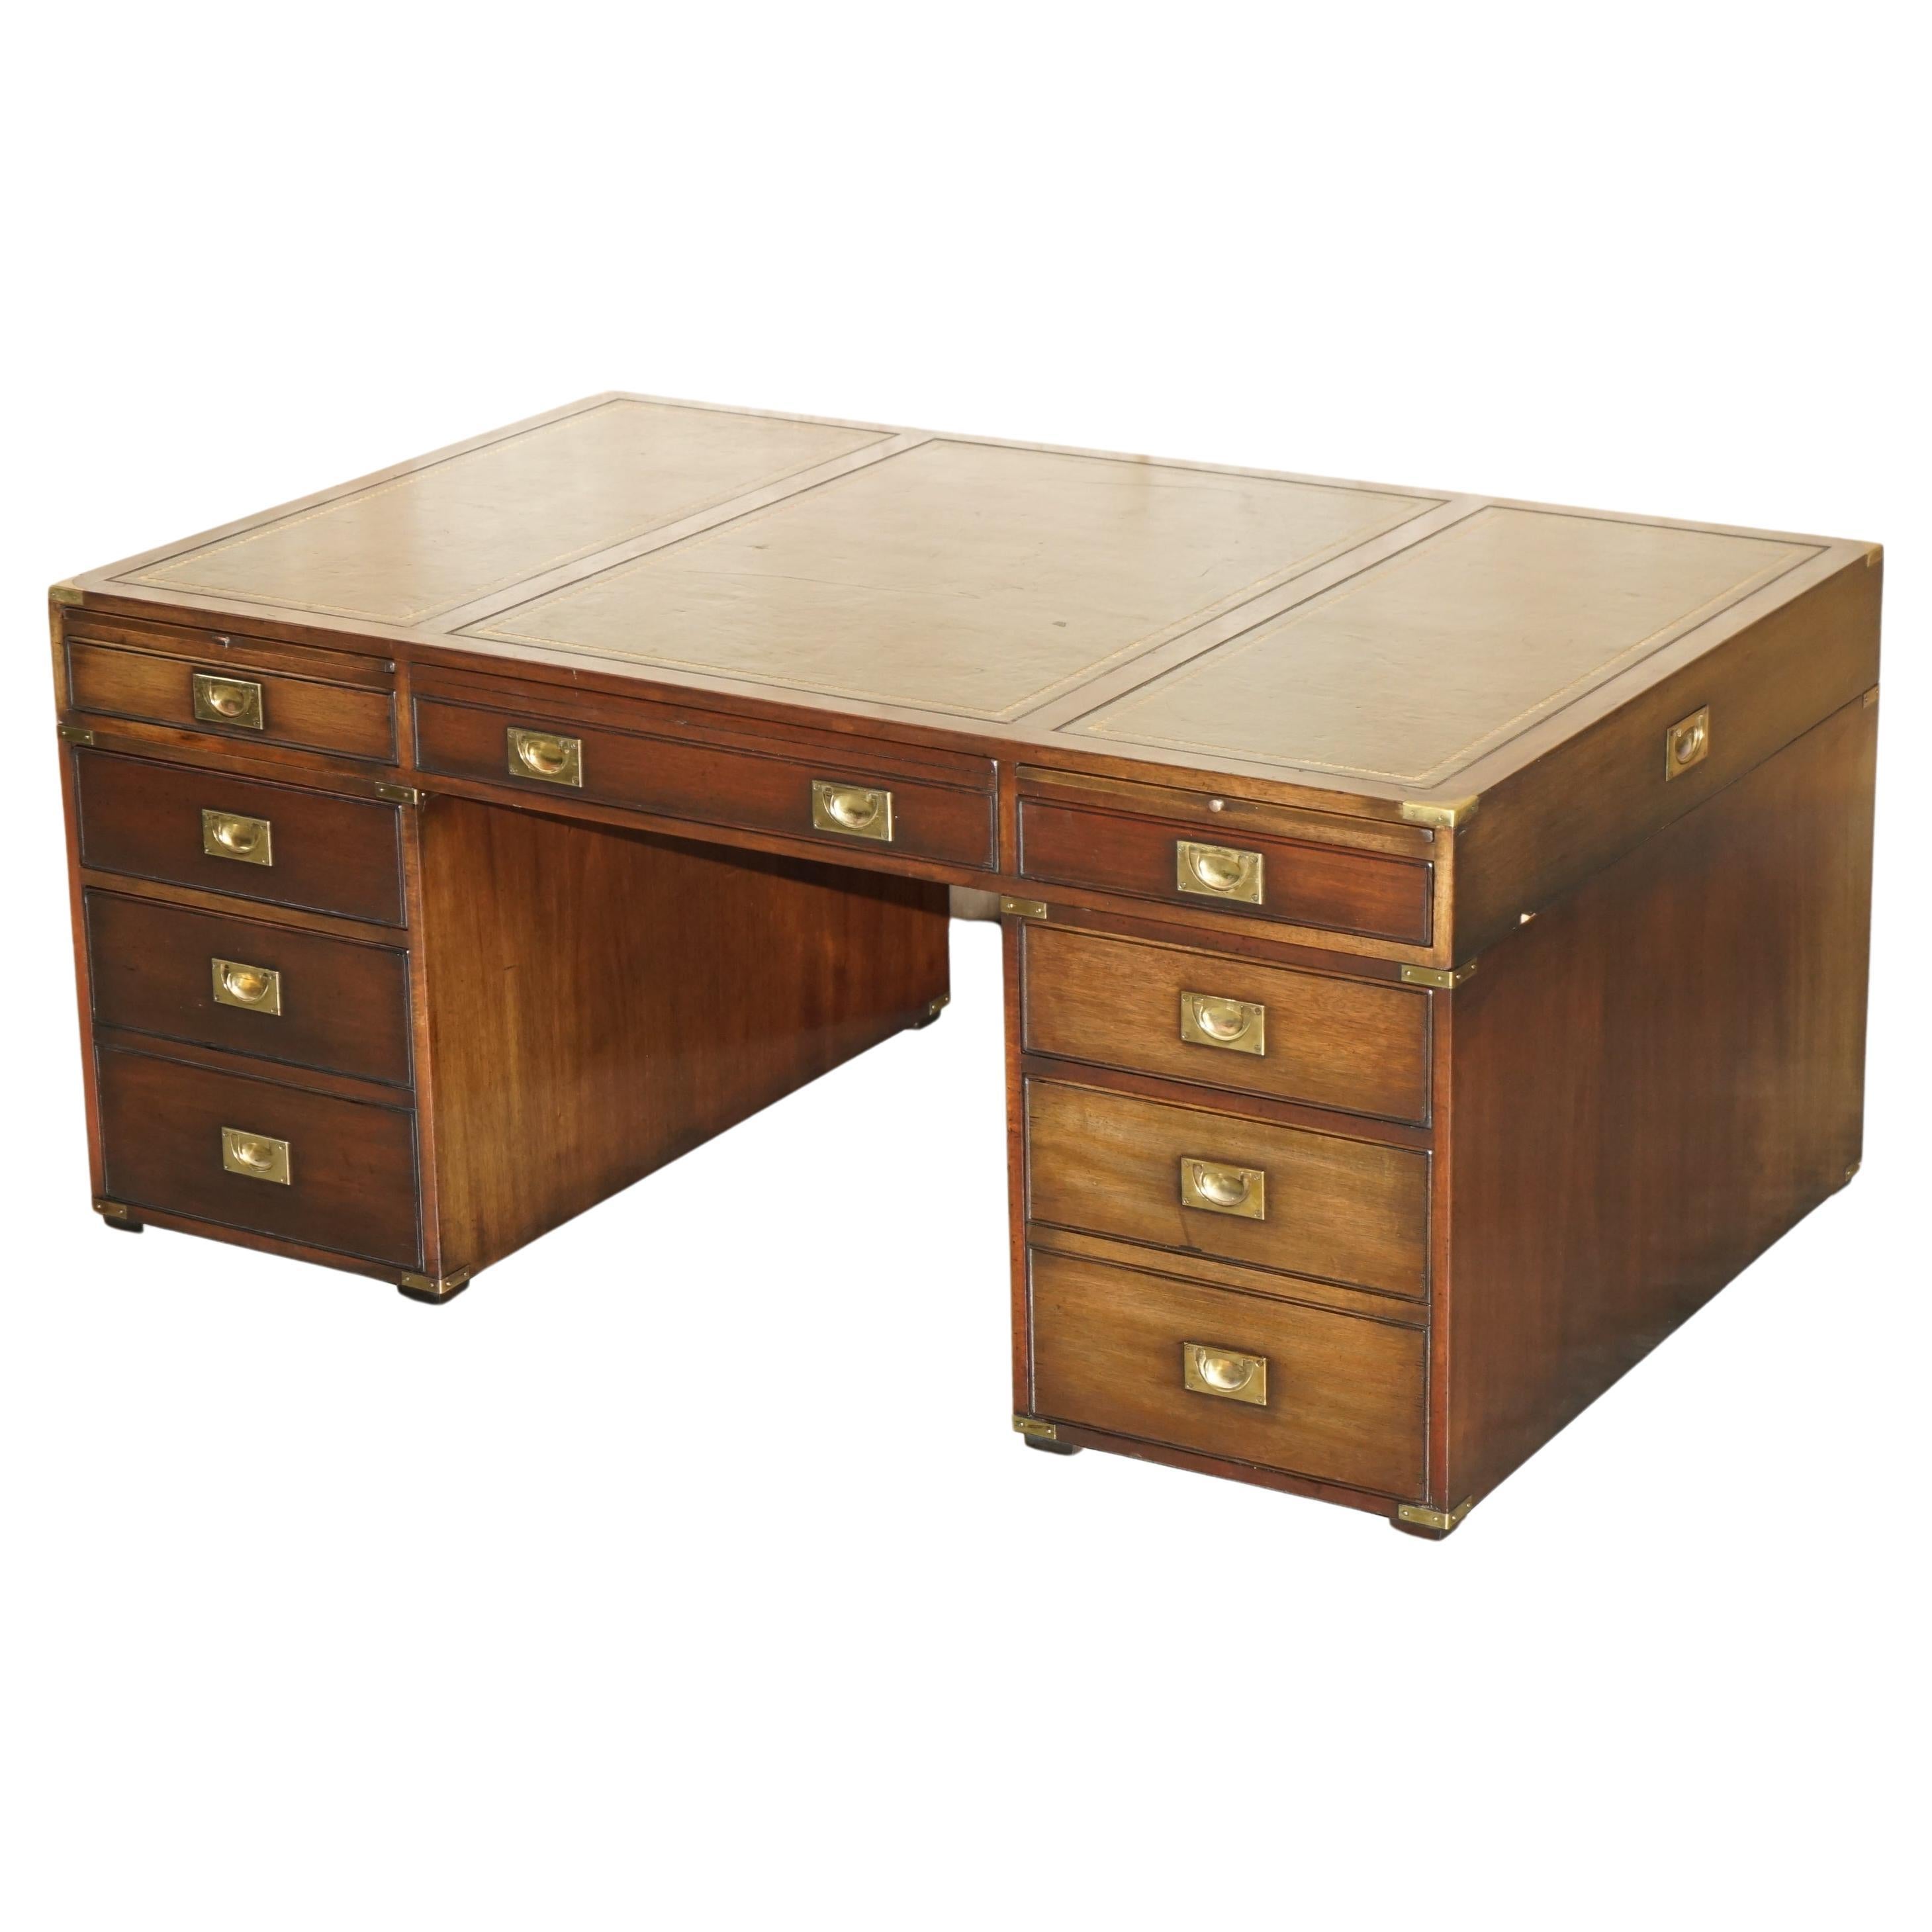 What is a double-sided desk called?